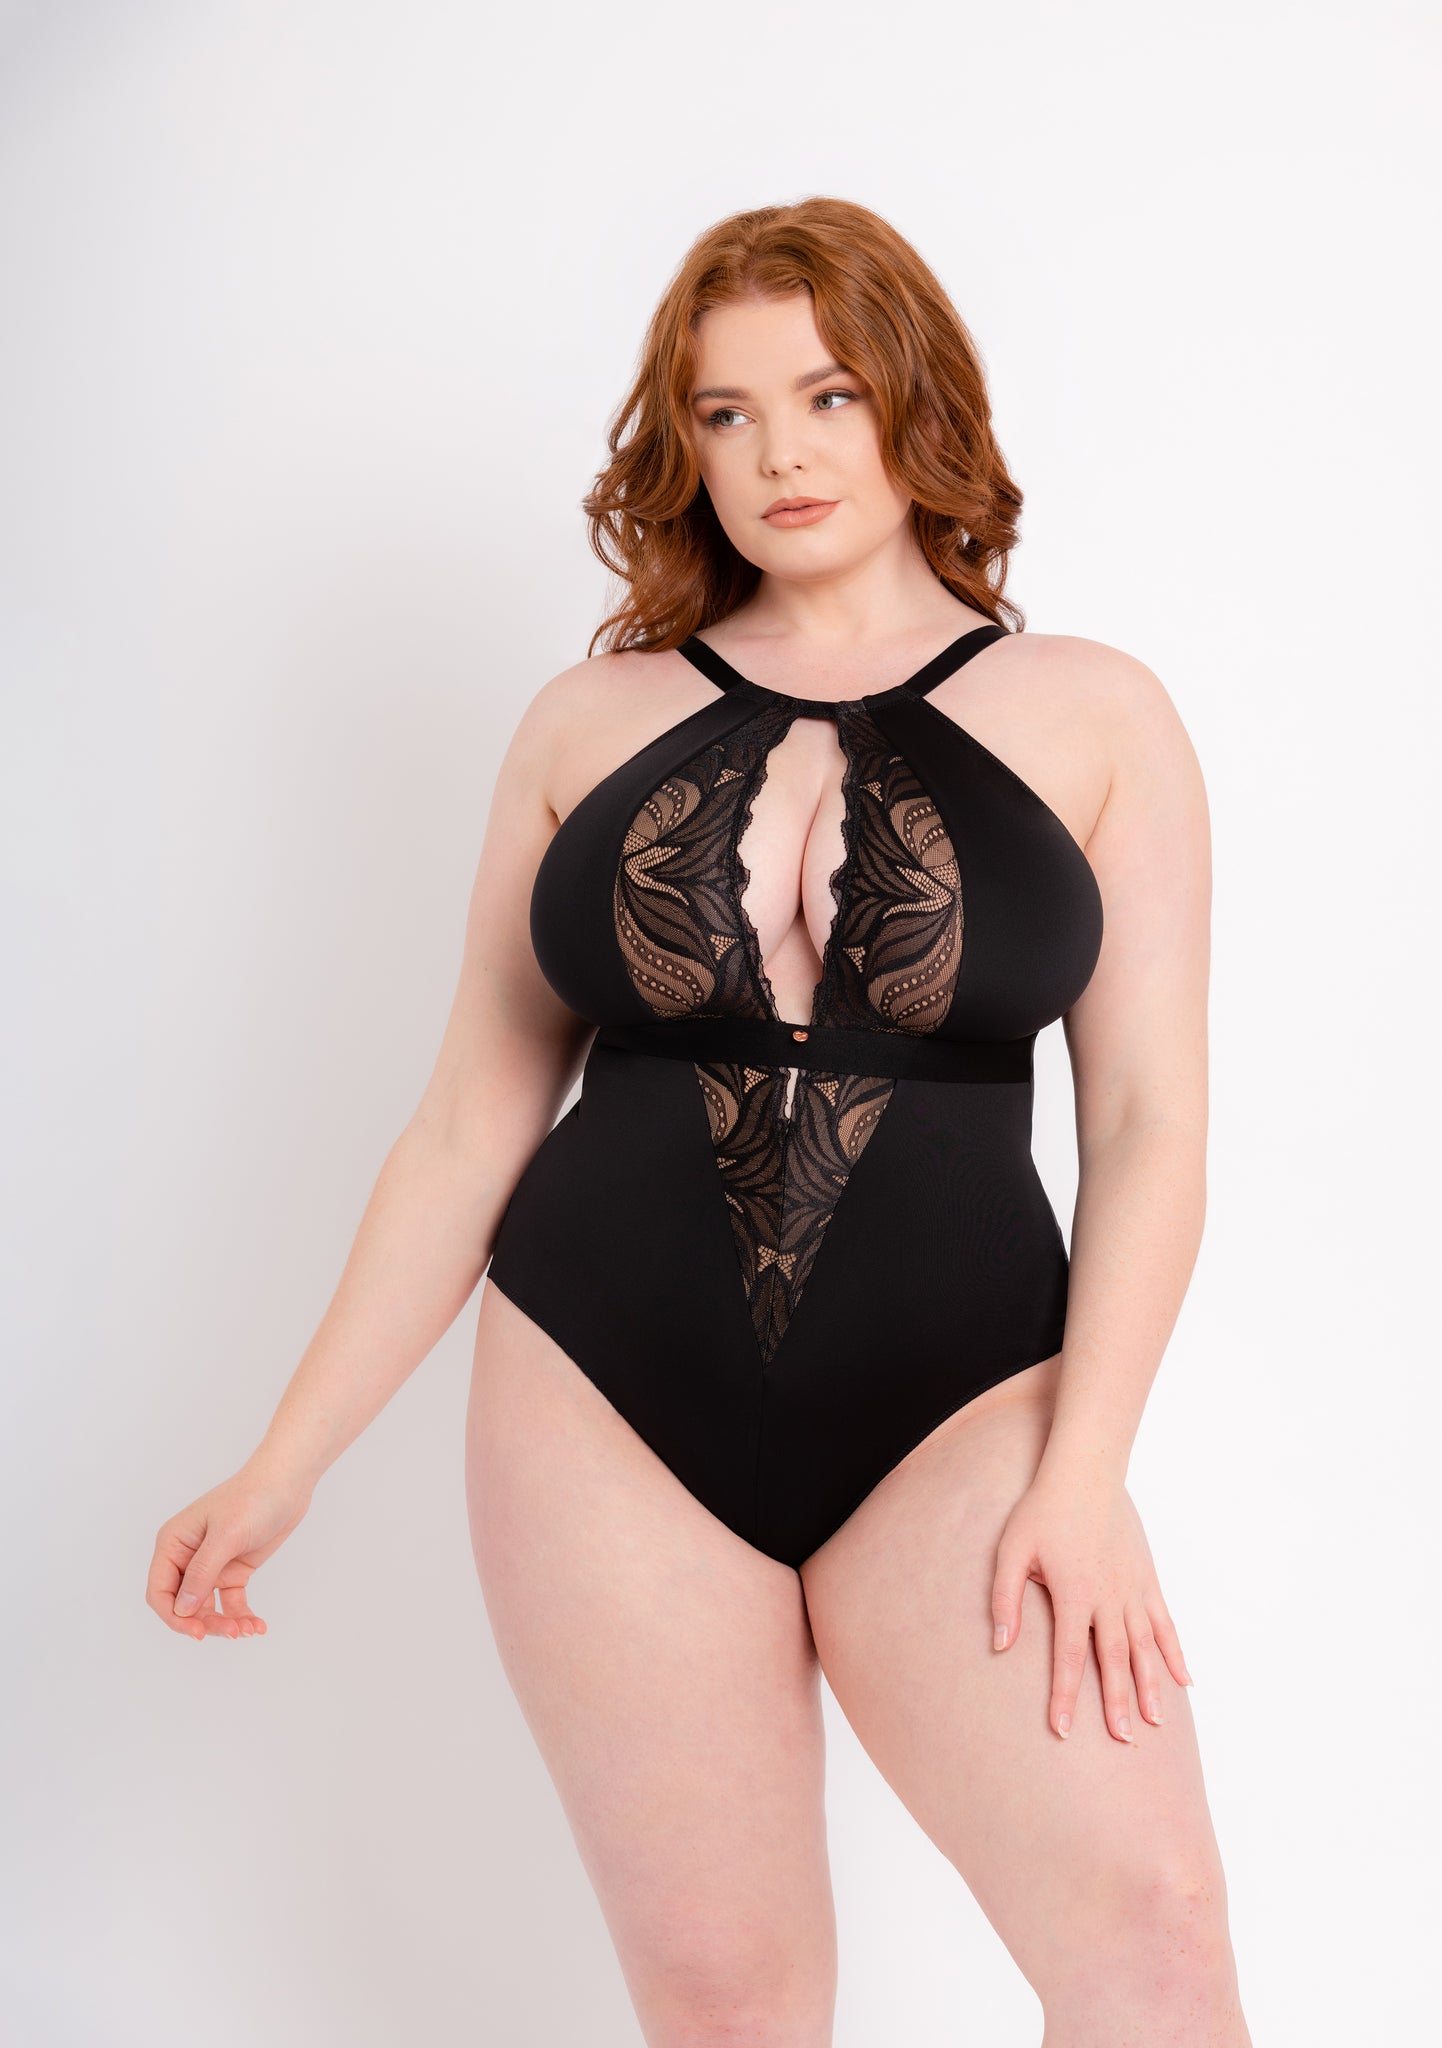 Scantilly by Curvy Kate Womens Indulgence Stretch Lace Bodysuit